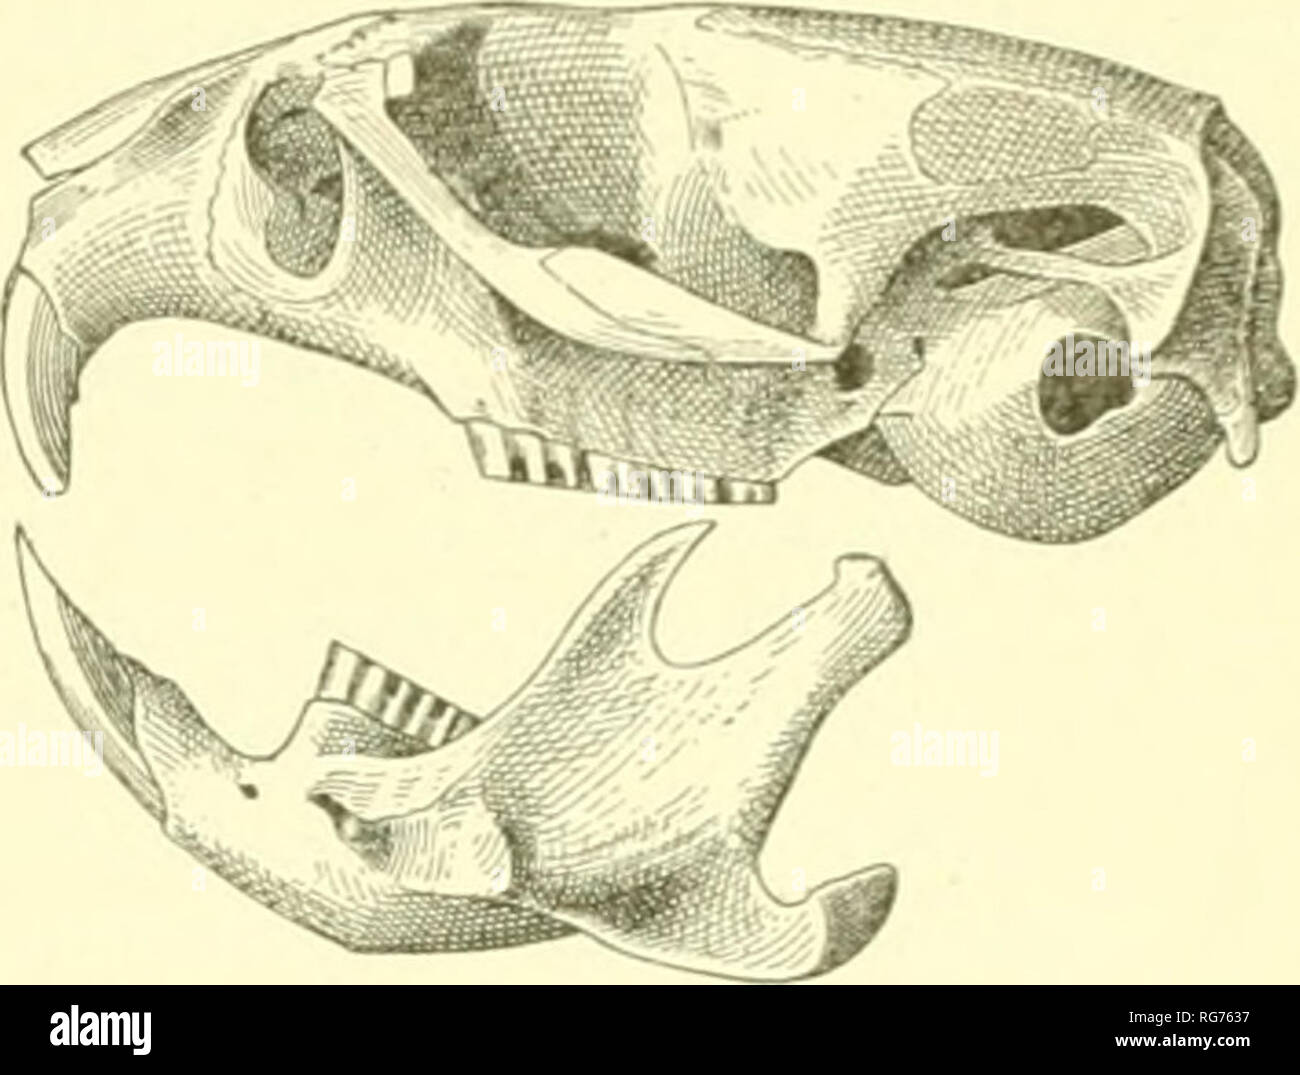 . Bulletin - United States National Museum. Science. Fig. 125. Mi&lt; eotus califorxicus. Skull, a, dorsal view; b, ventraj, view; c, lateral view. Description.—Size, large; mamma?, P.f,A#, I.|=4 pairs: skull (fig. 125) massive with rostral portion short and depressed; teeth as shown in fig. 126; coloration similar to Microtus edax; pelage full, long, and rather soft; plantar tubercles, 6. Color.—Upper parts bistre enlivened by tawny and black hairs, shading to grayish drab on sides and rump; under parts plumbeous, overlaid by hoary tips to the hairs; tail not distinctly bicolor, but dusky abo Stock Photo